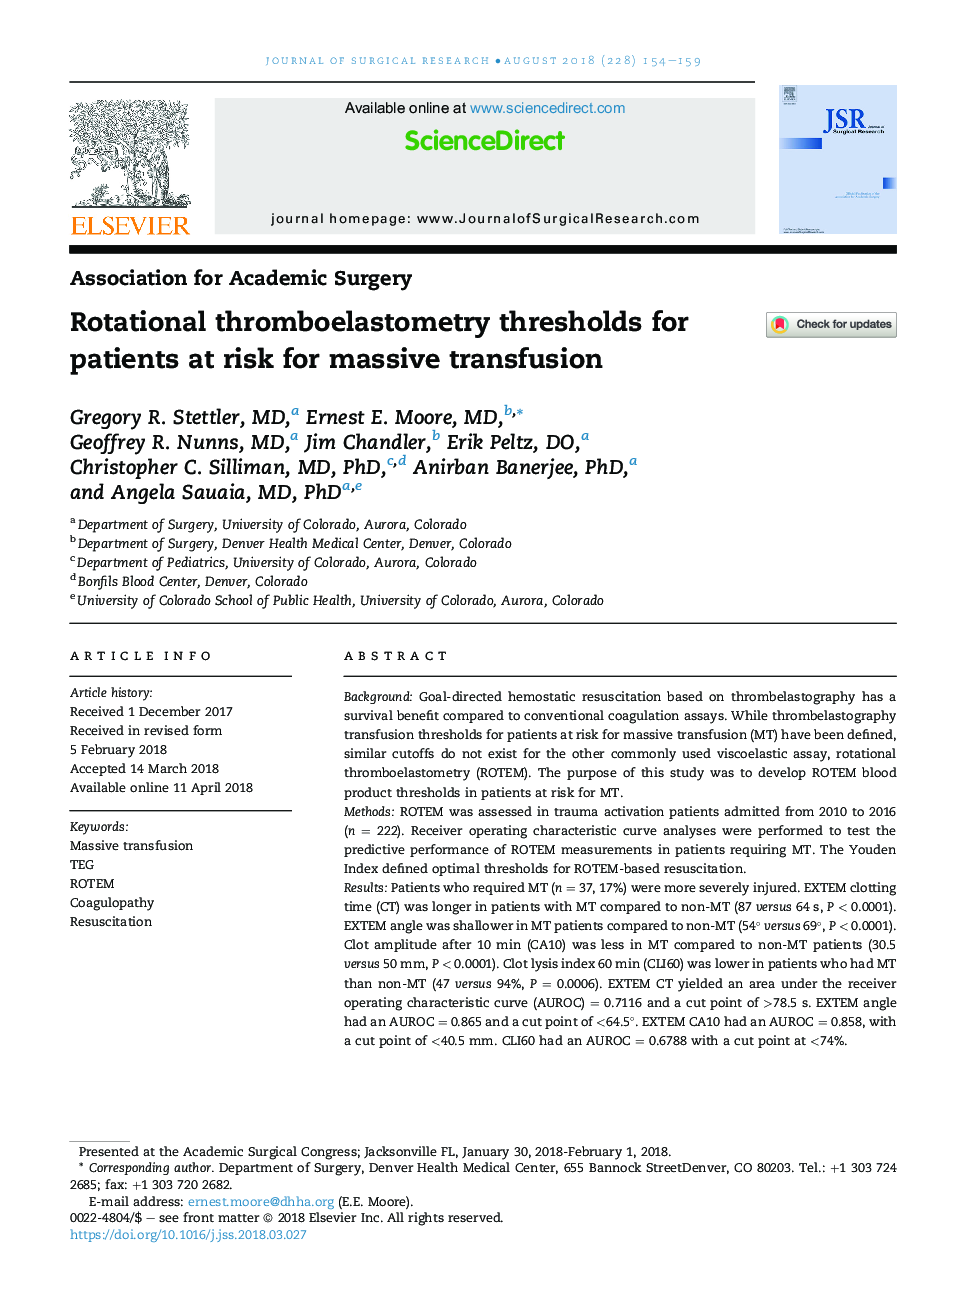 Rotational thromboelastometry thresholds for patients at risk for massive transfusion